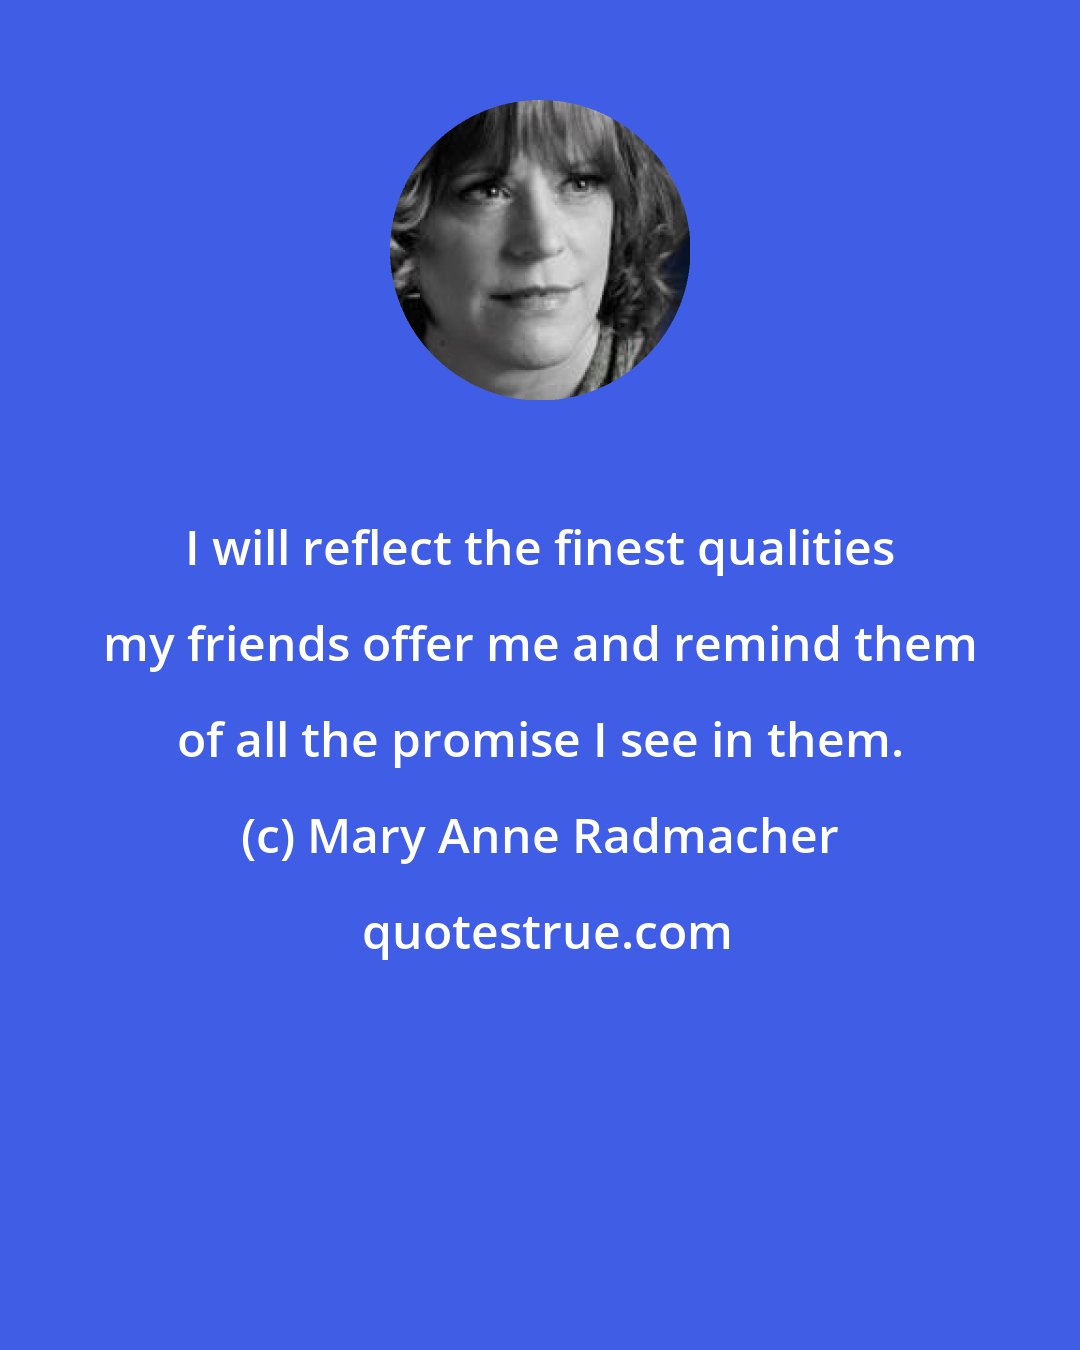 Mary Anne Radmacher: I will reflect the finest qualities my friends offer me and remind them of all the promise I see in them.